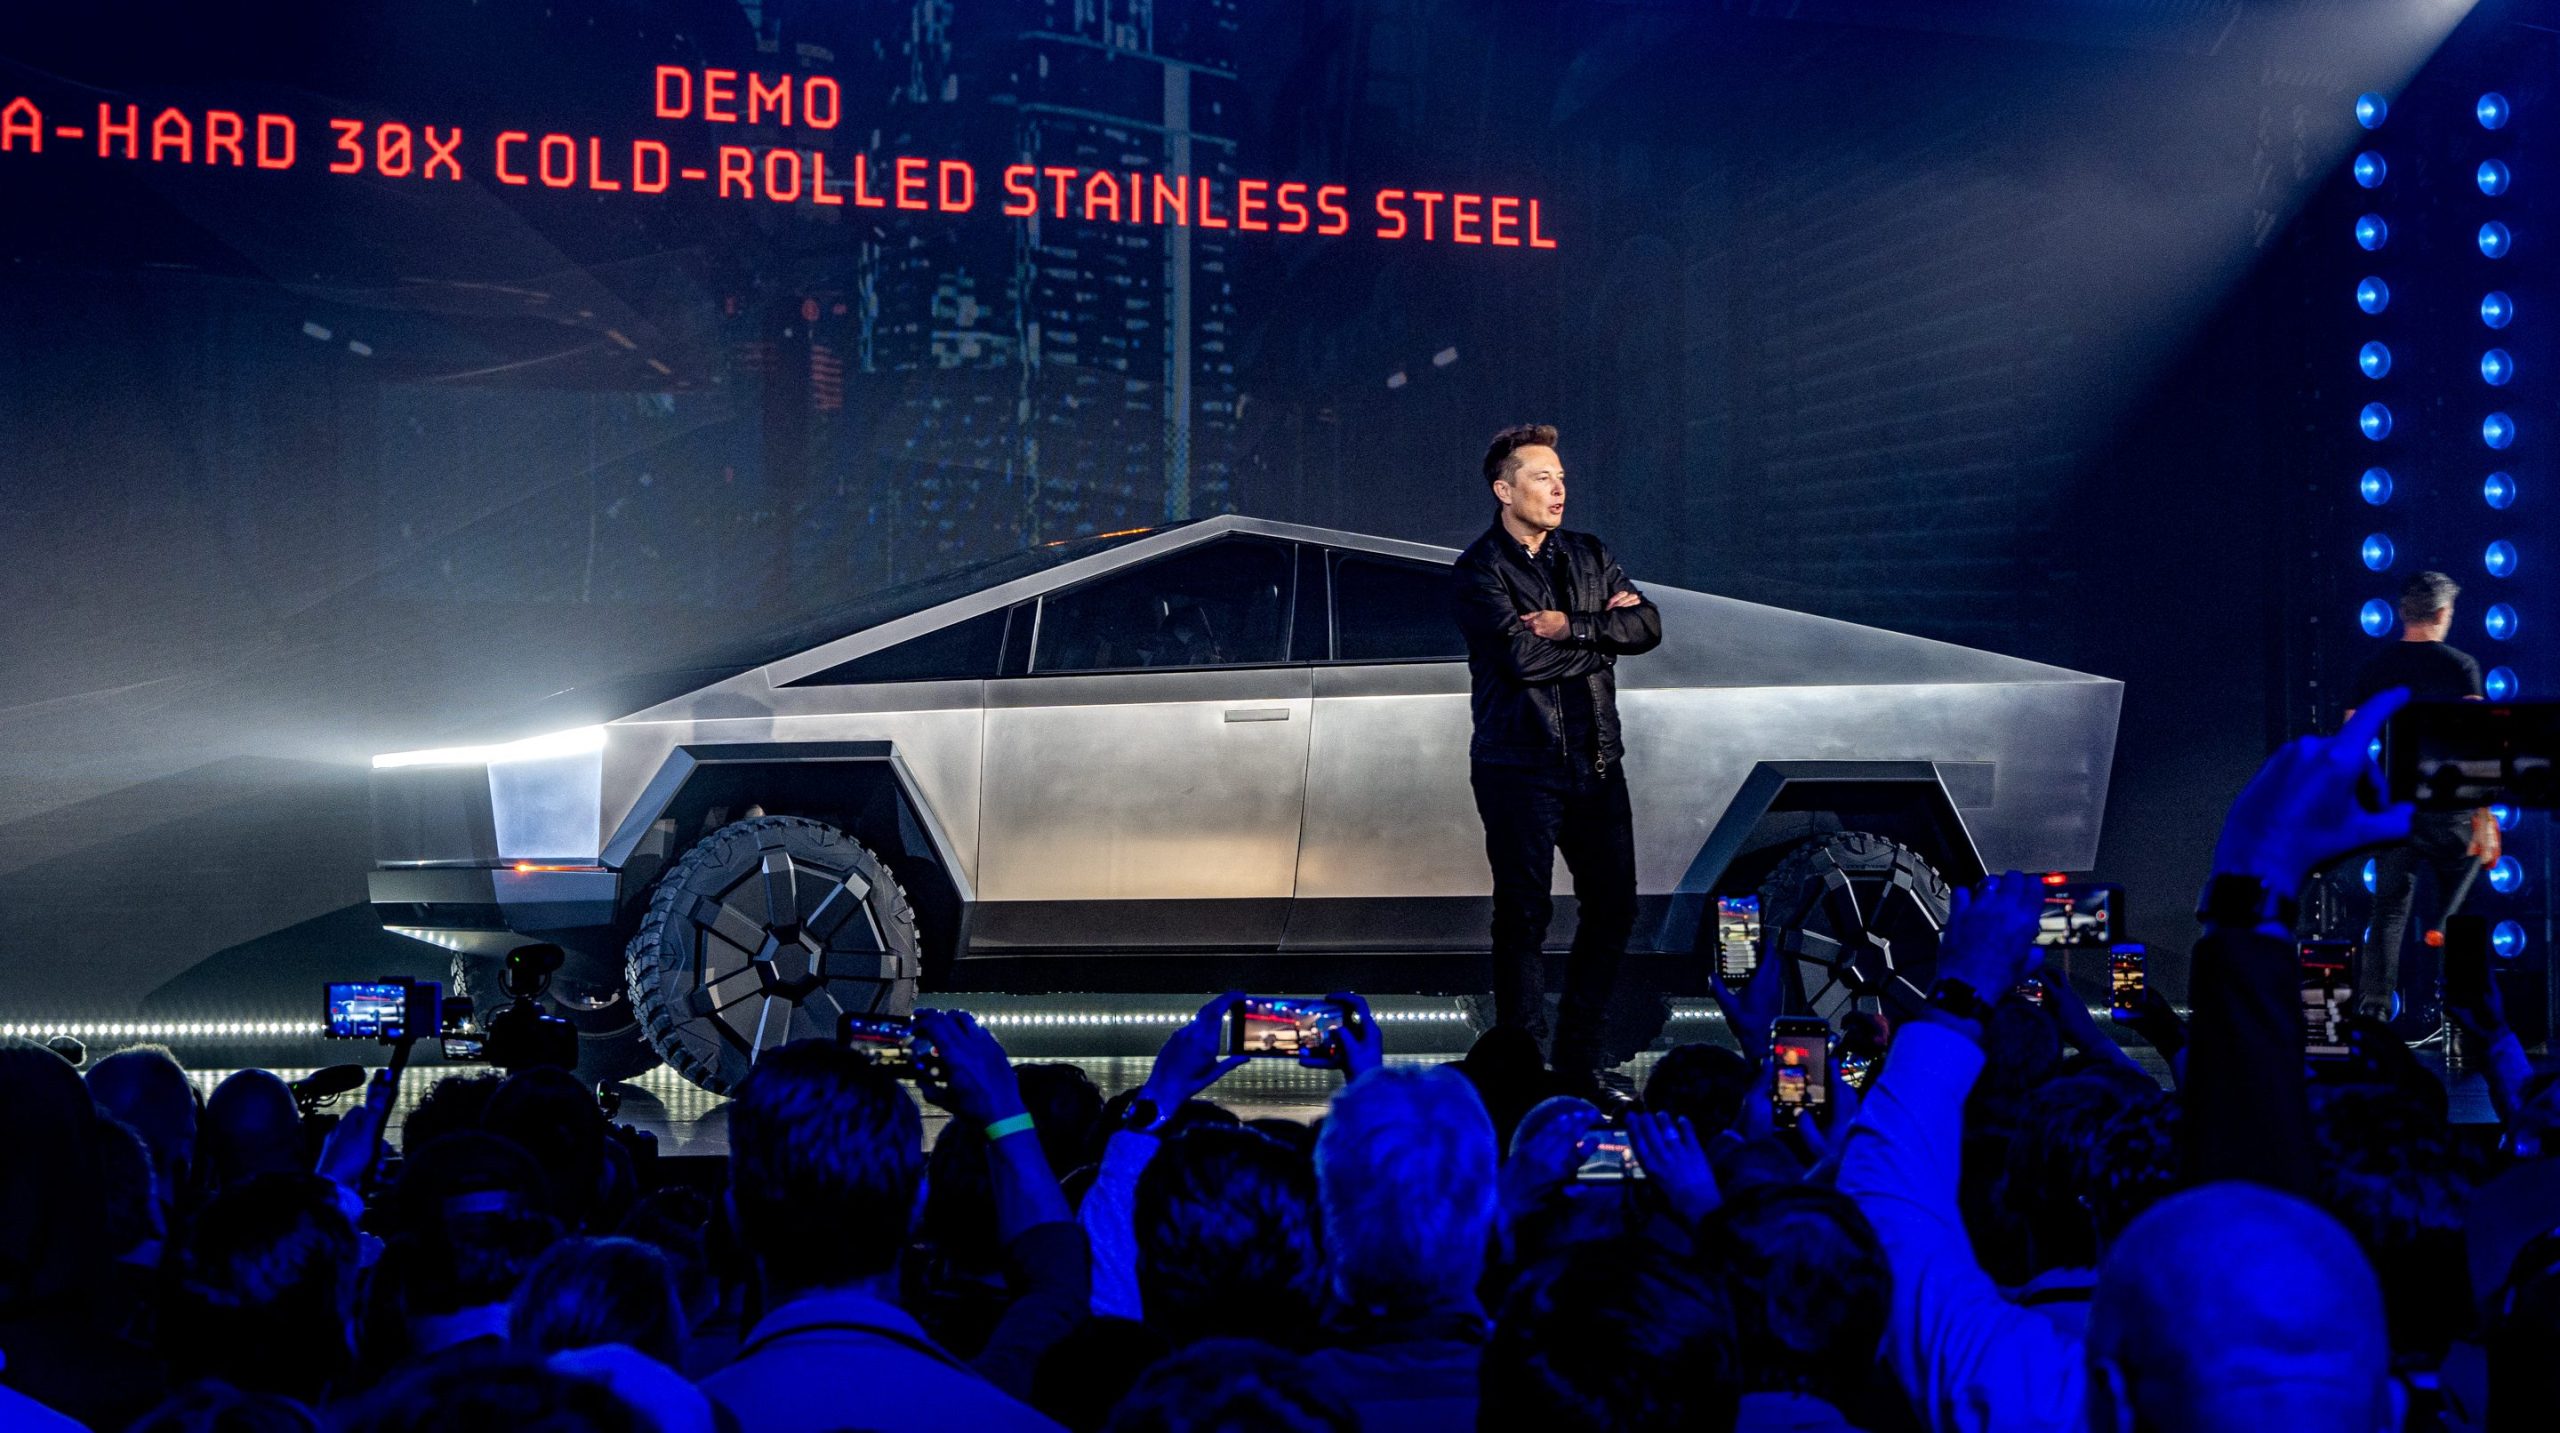 Tesla Cybertruck production is close, new details from Elon Musk reveal